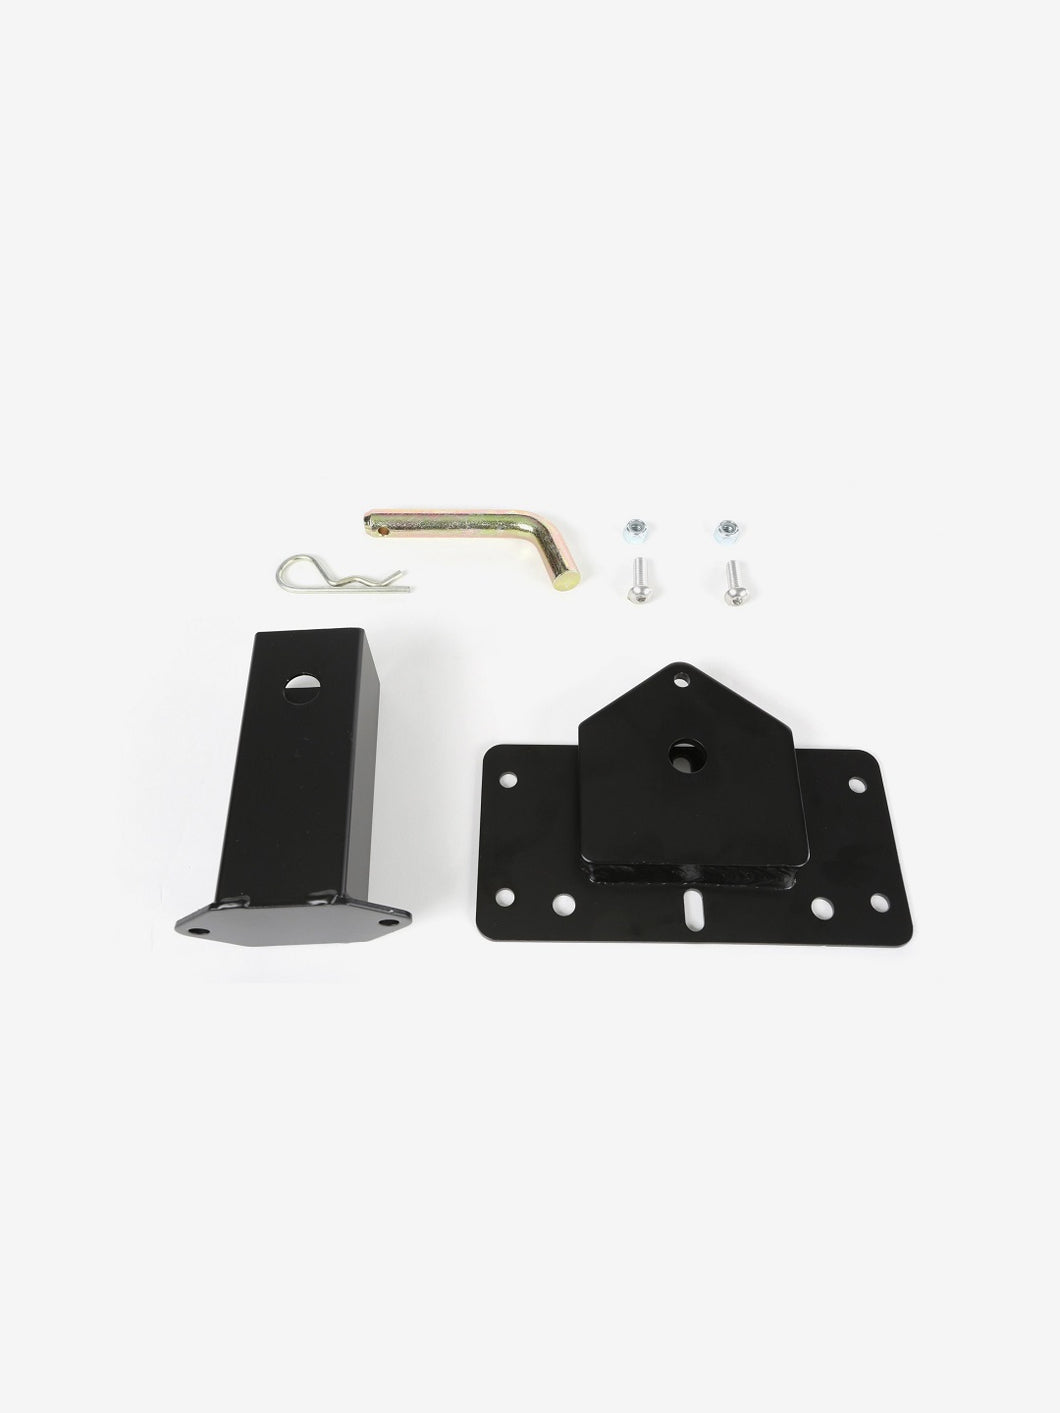 Pictured are 8 pieces of a Trailer Hitch Mount kit. In front are the mount plate on the right and the hitch plate on the left, both made from steel. Above-right are two silver screws and two silver bolts. Above-left is a silver piece of metal wire that is bent in two, with one length wavy and the other straight (like two lock-pick tools connected together). Above-center is a gold coloured, 2 inch long piece, shaped like an L, but with the shorter piece of bar at a 95 or 98 degree angle. 